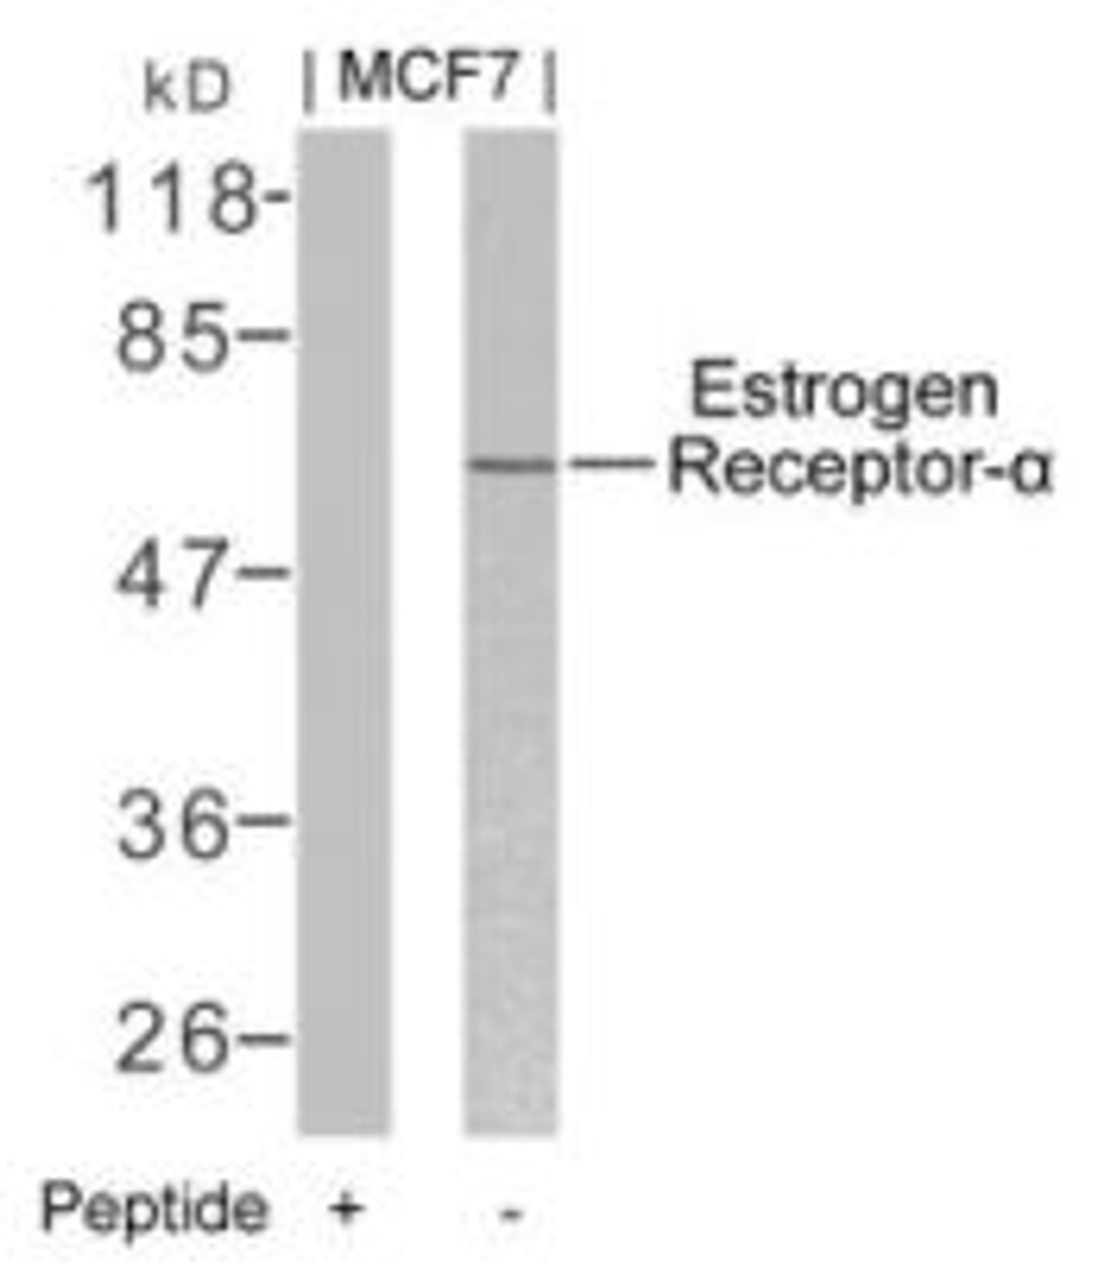 Western blot analysis of lysed extracts from MCF7 cells using Estrogen Receptor-&#945; (Ab-106) .